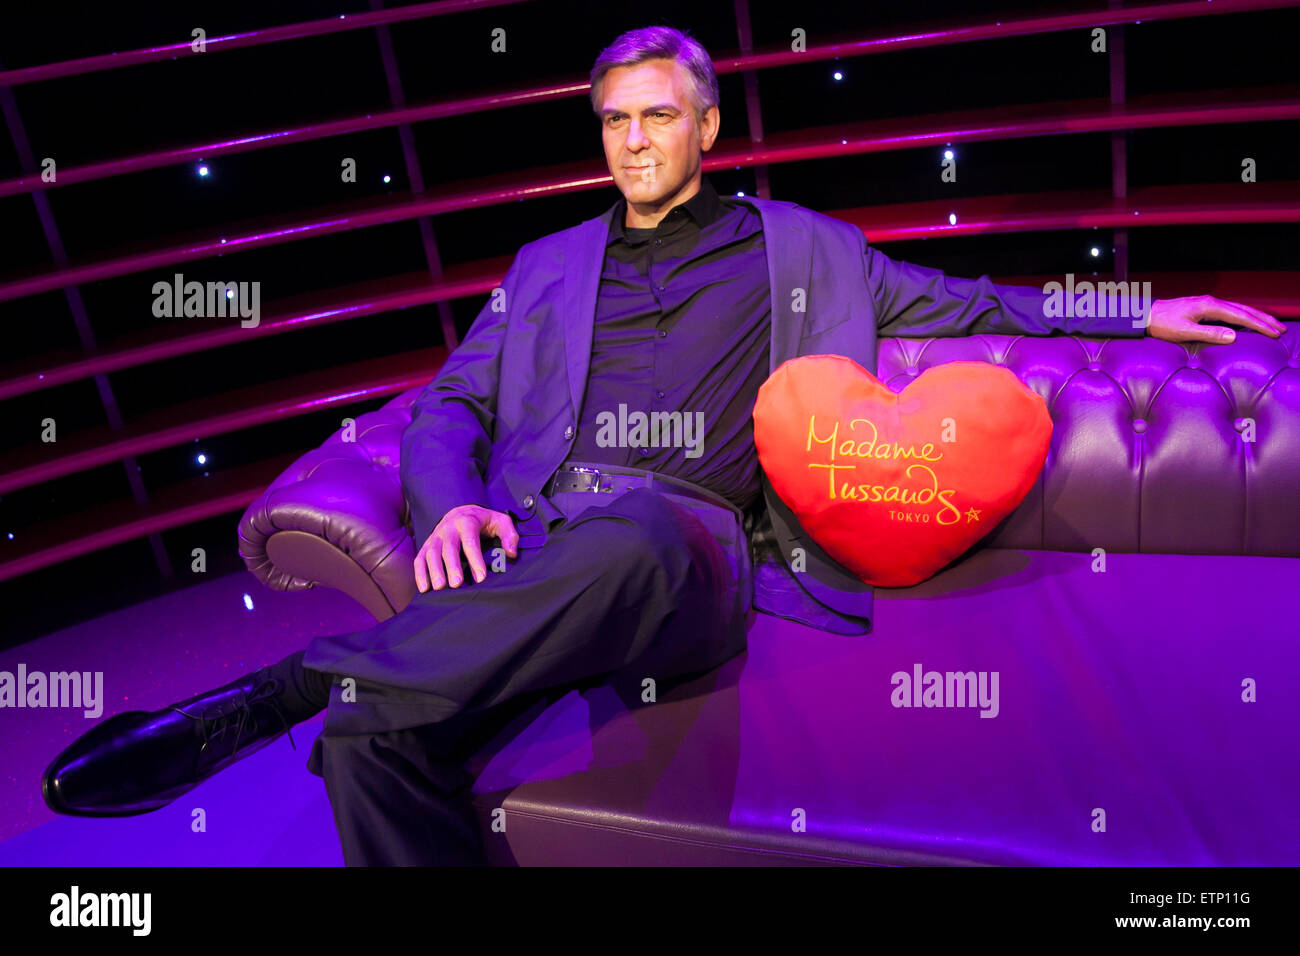 A wax figure of George Clooney, American actor, writer and producer on display at the Madame Tussauds Tokyo wax museum in Odaiba, Tokyo, June 15, 2015. The world famous British wax museum ''Madame Tussauds'' opened its 14th permanent branch in Tokyo in 2013 and exhibits international and local celebrities, sports players and politicians. New additions to the collection include wax figures of the Japanese figure skater Yuzuru Hanyu and the actor Benedict Cumberbatch. The wax figure of Benedict Cumberbatch will be exhibited until June 30th. (Photo by Rodrigo Reyes Marin/AFLO) Stock Photo